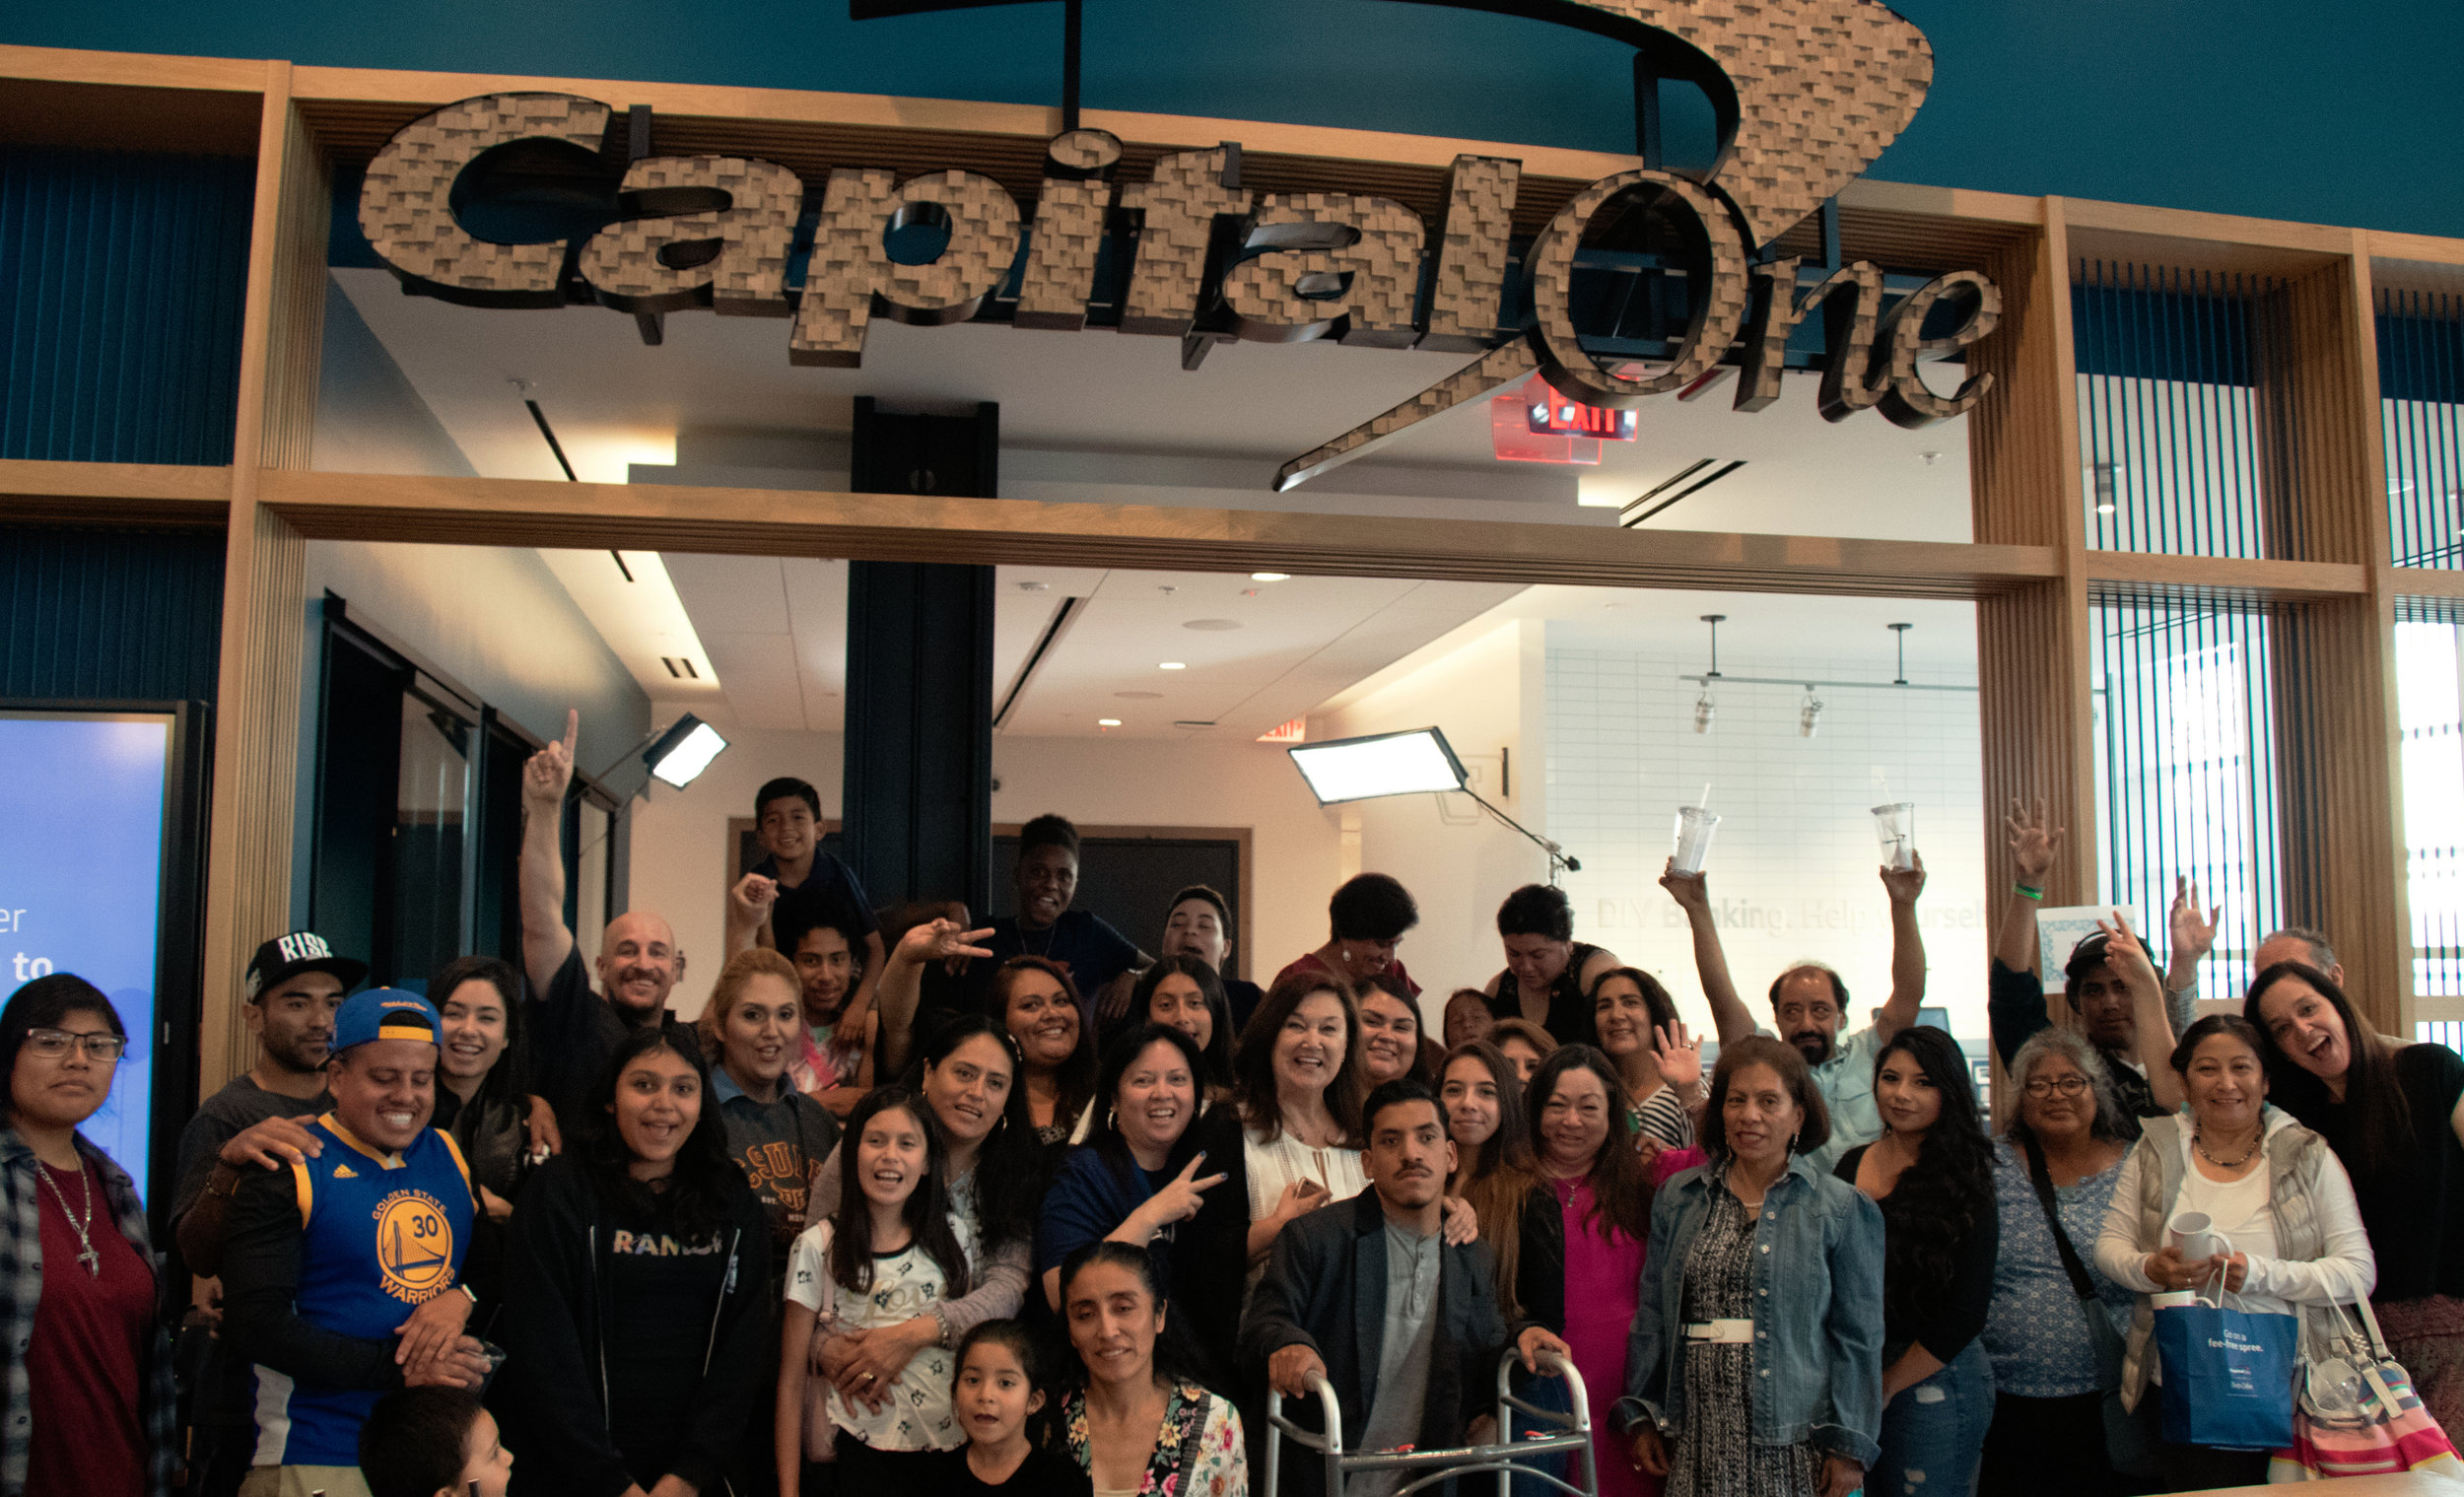 Mother's day at Capital One Cafe May 11, 2019-GREAT GROUP PHOTO.jpg